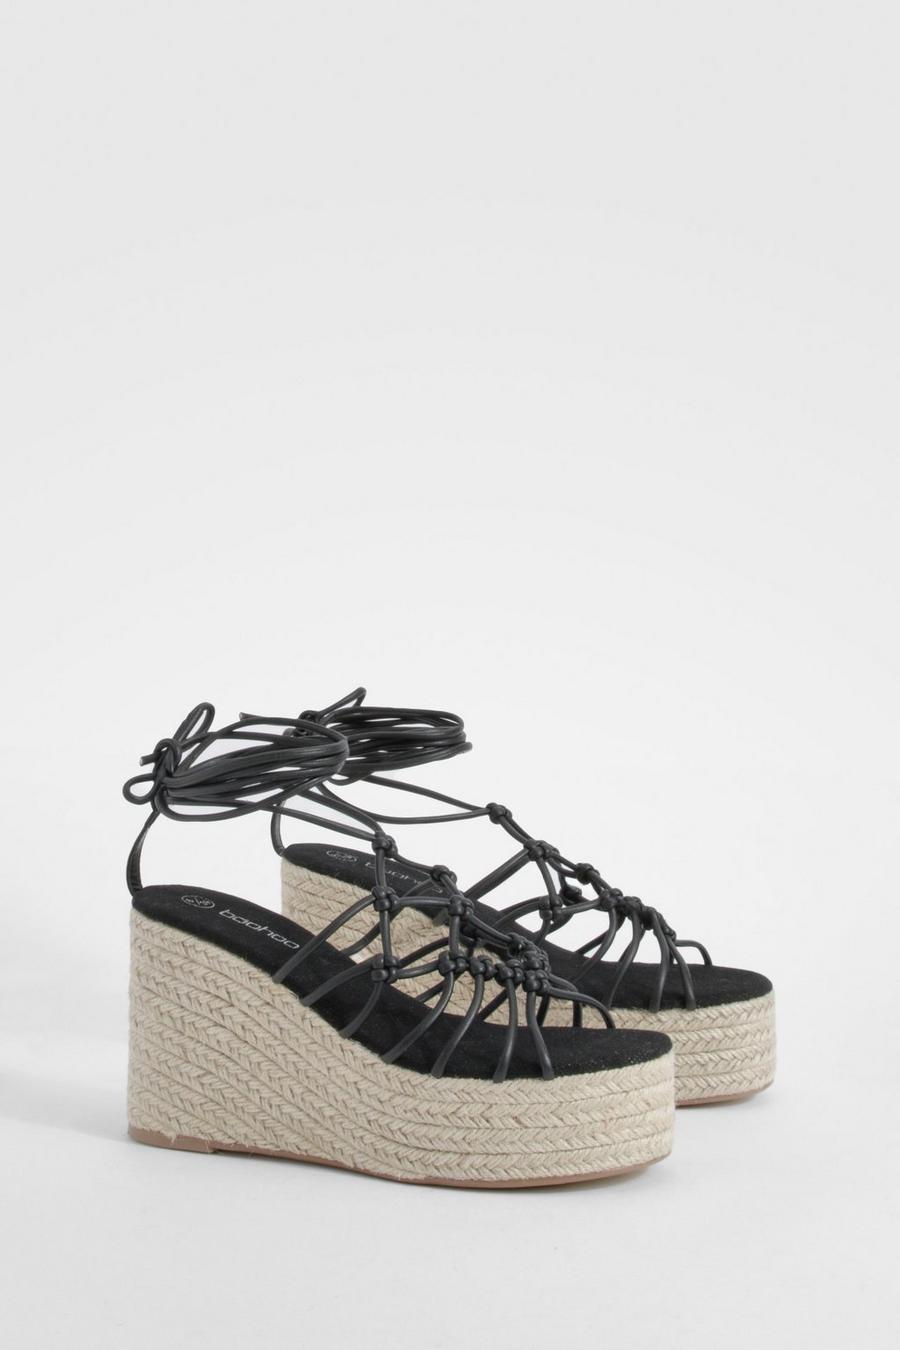 Black Knot Detail Mid Height Wedges